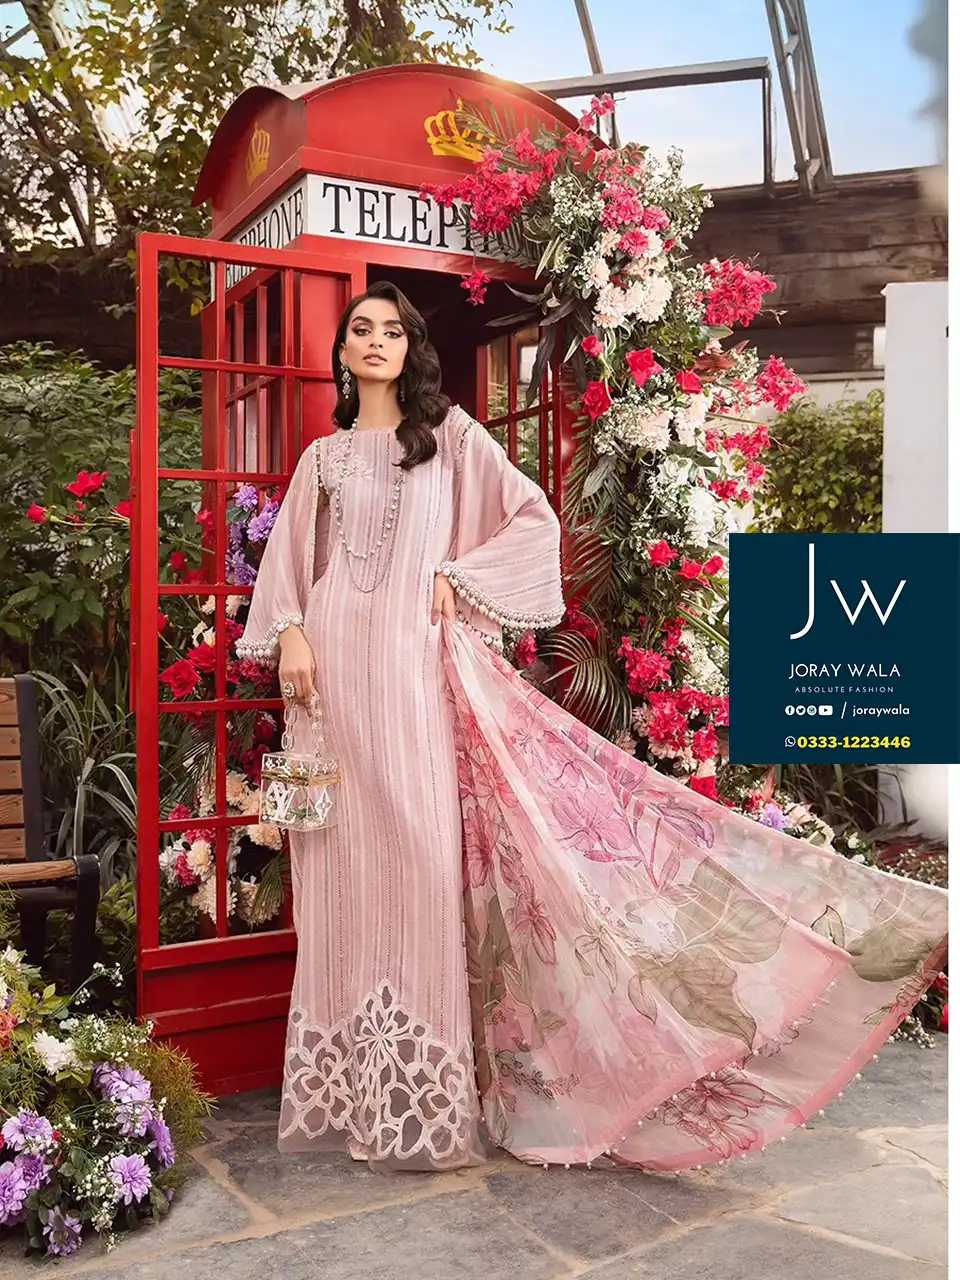 Model wearing a beautiful pink color 3 pcs suit and standing before red color telephone booth, a lot for flowers around the model, and the suit code is MPT-2109-A